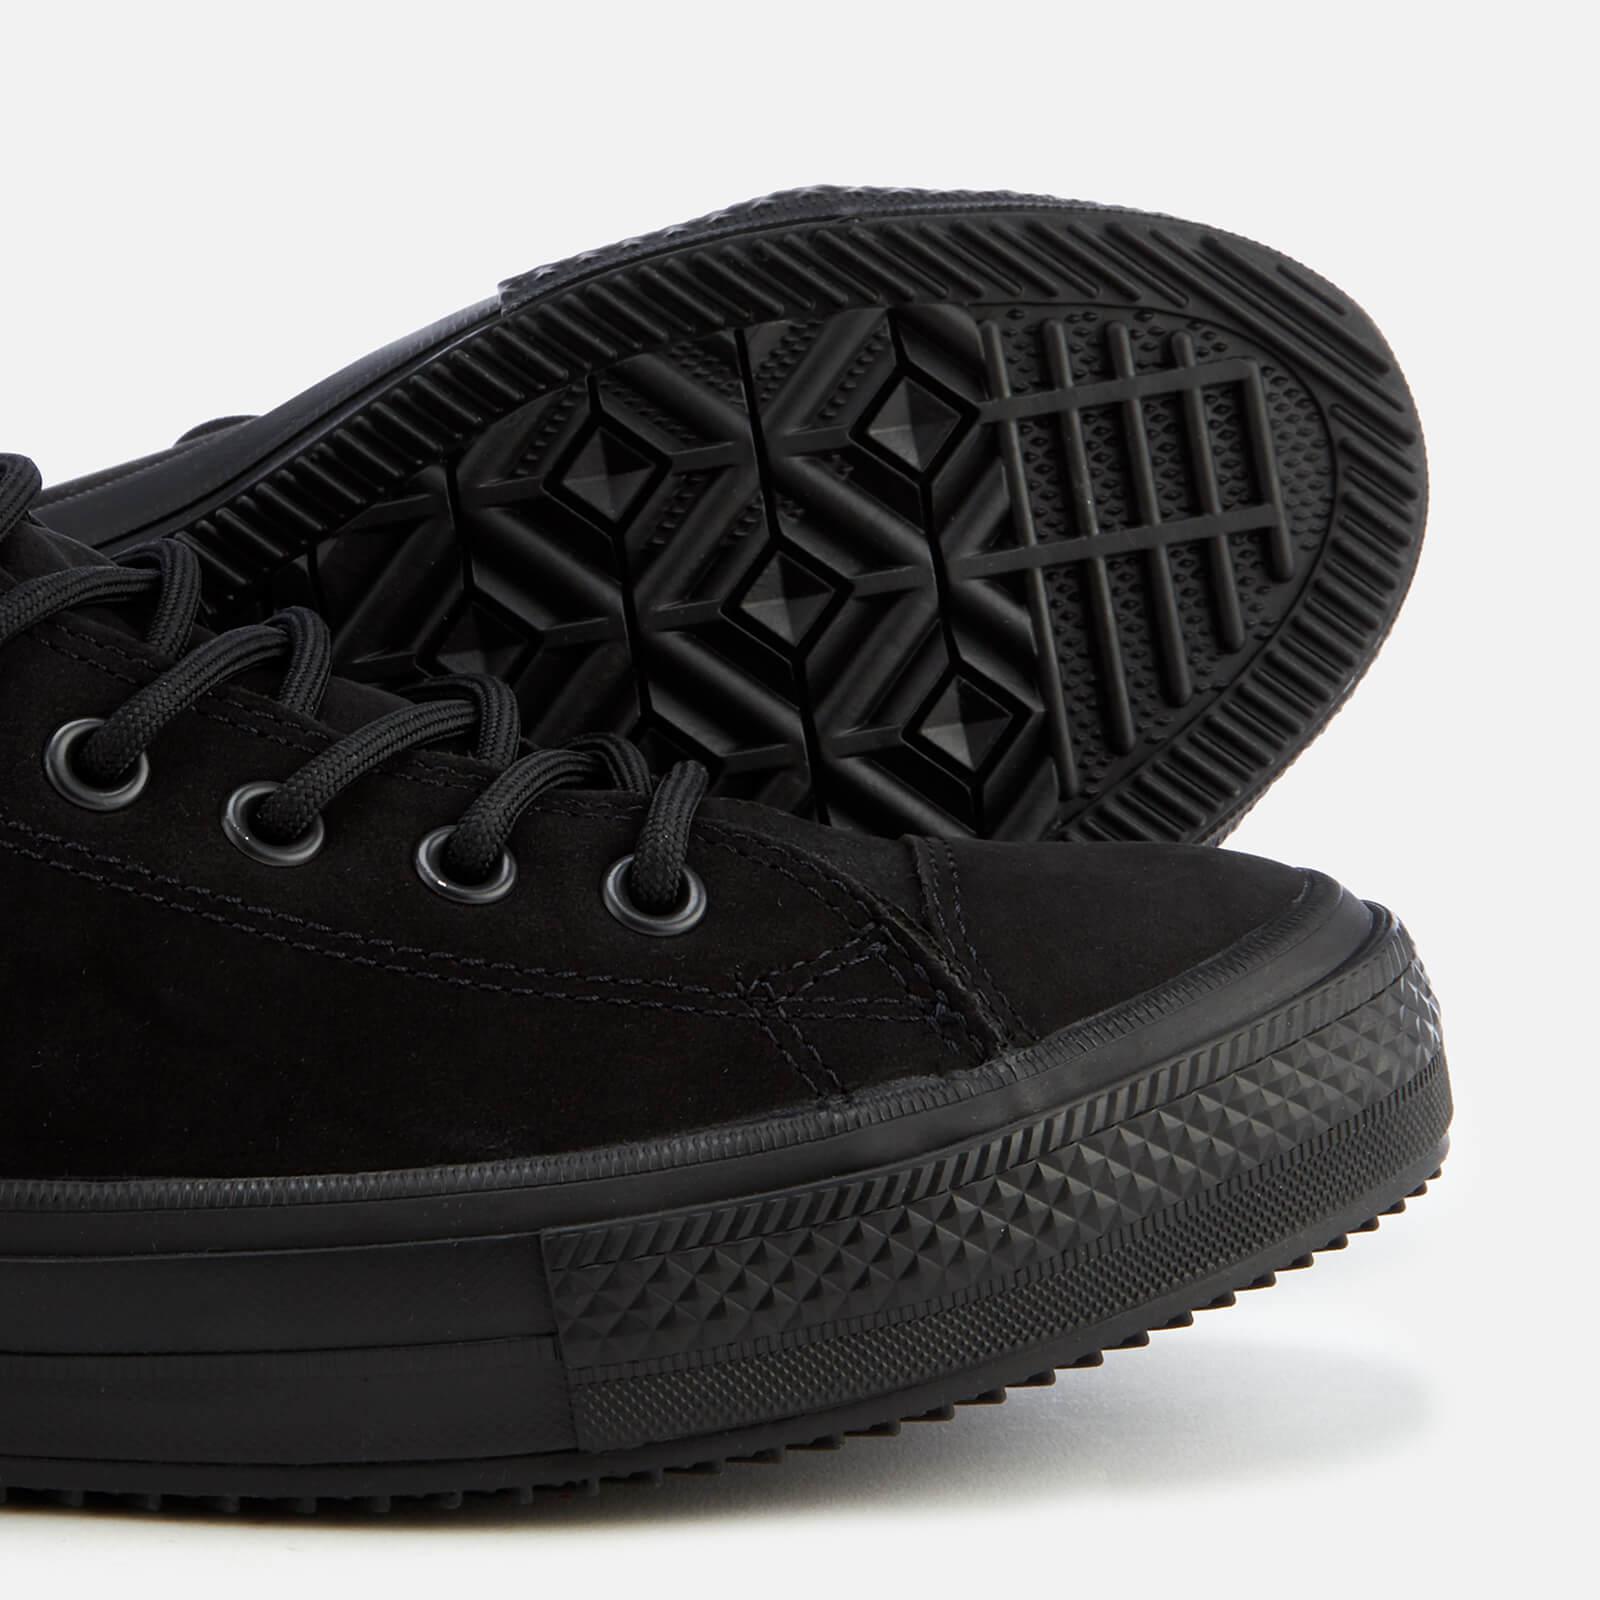 Converse Chuck Taylor Star Waterproof Boots in Black | Lyst